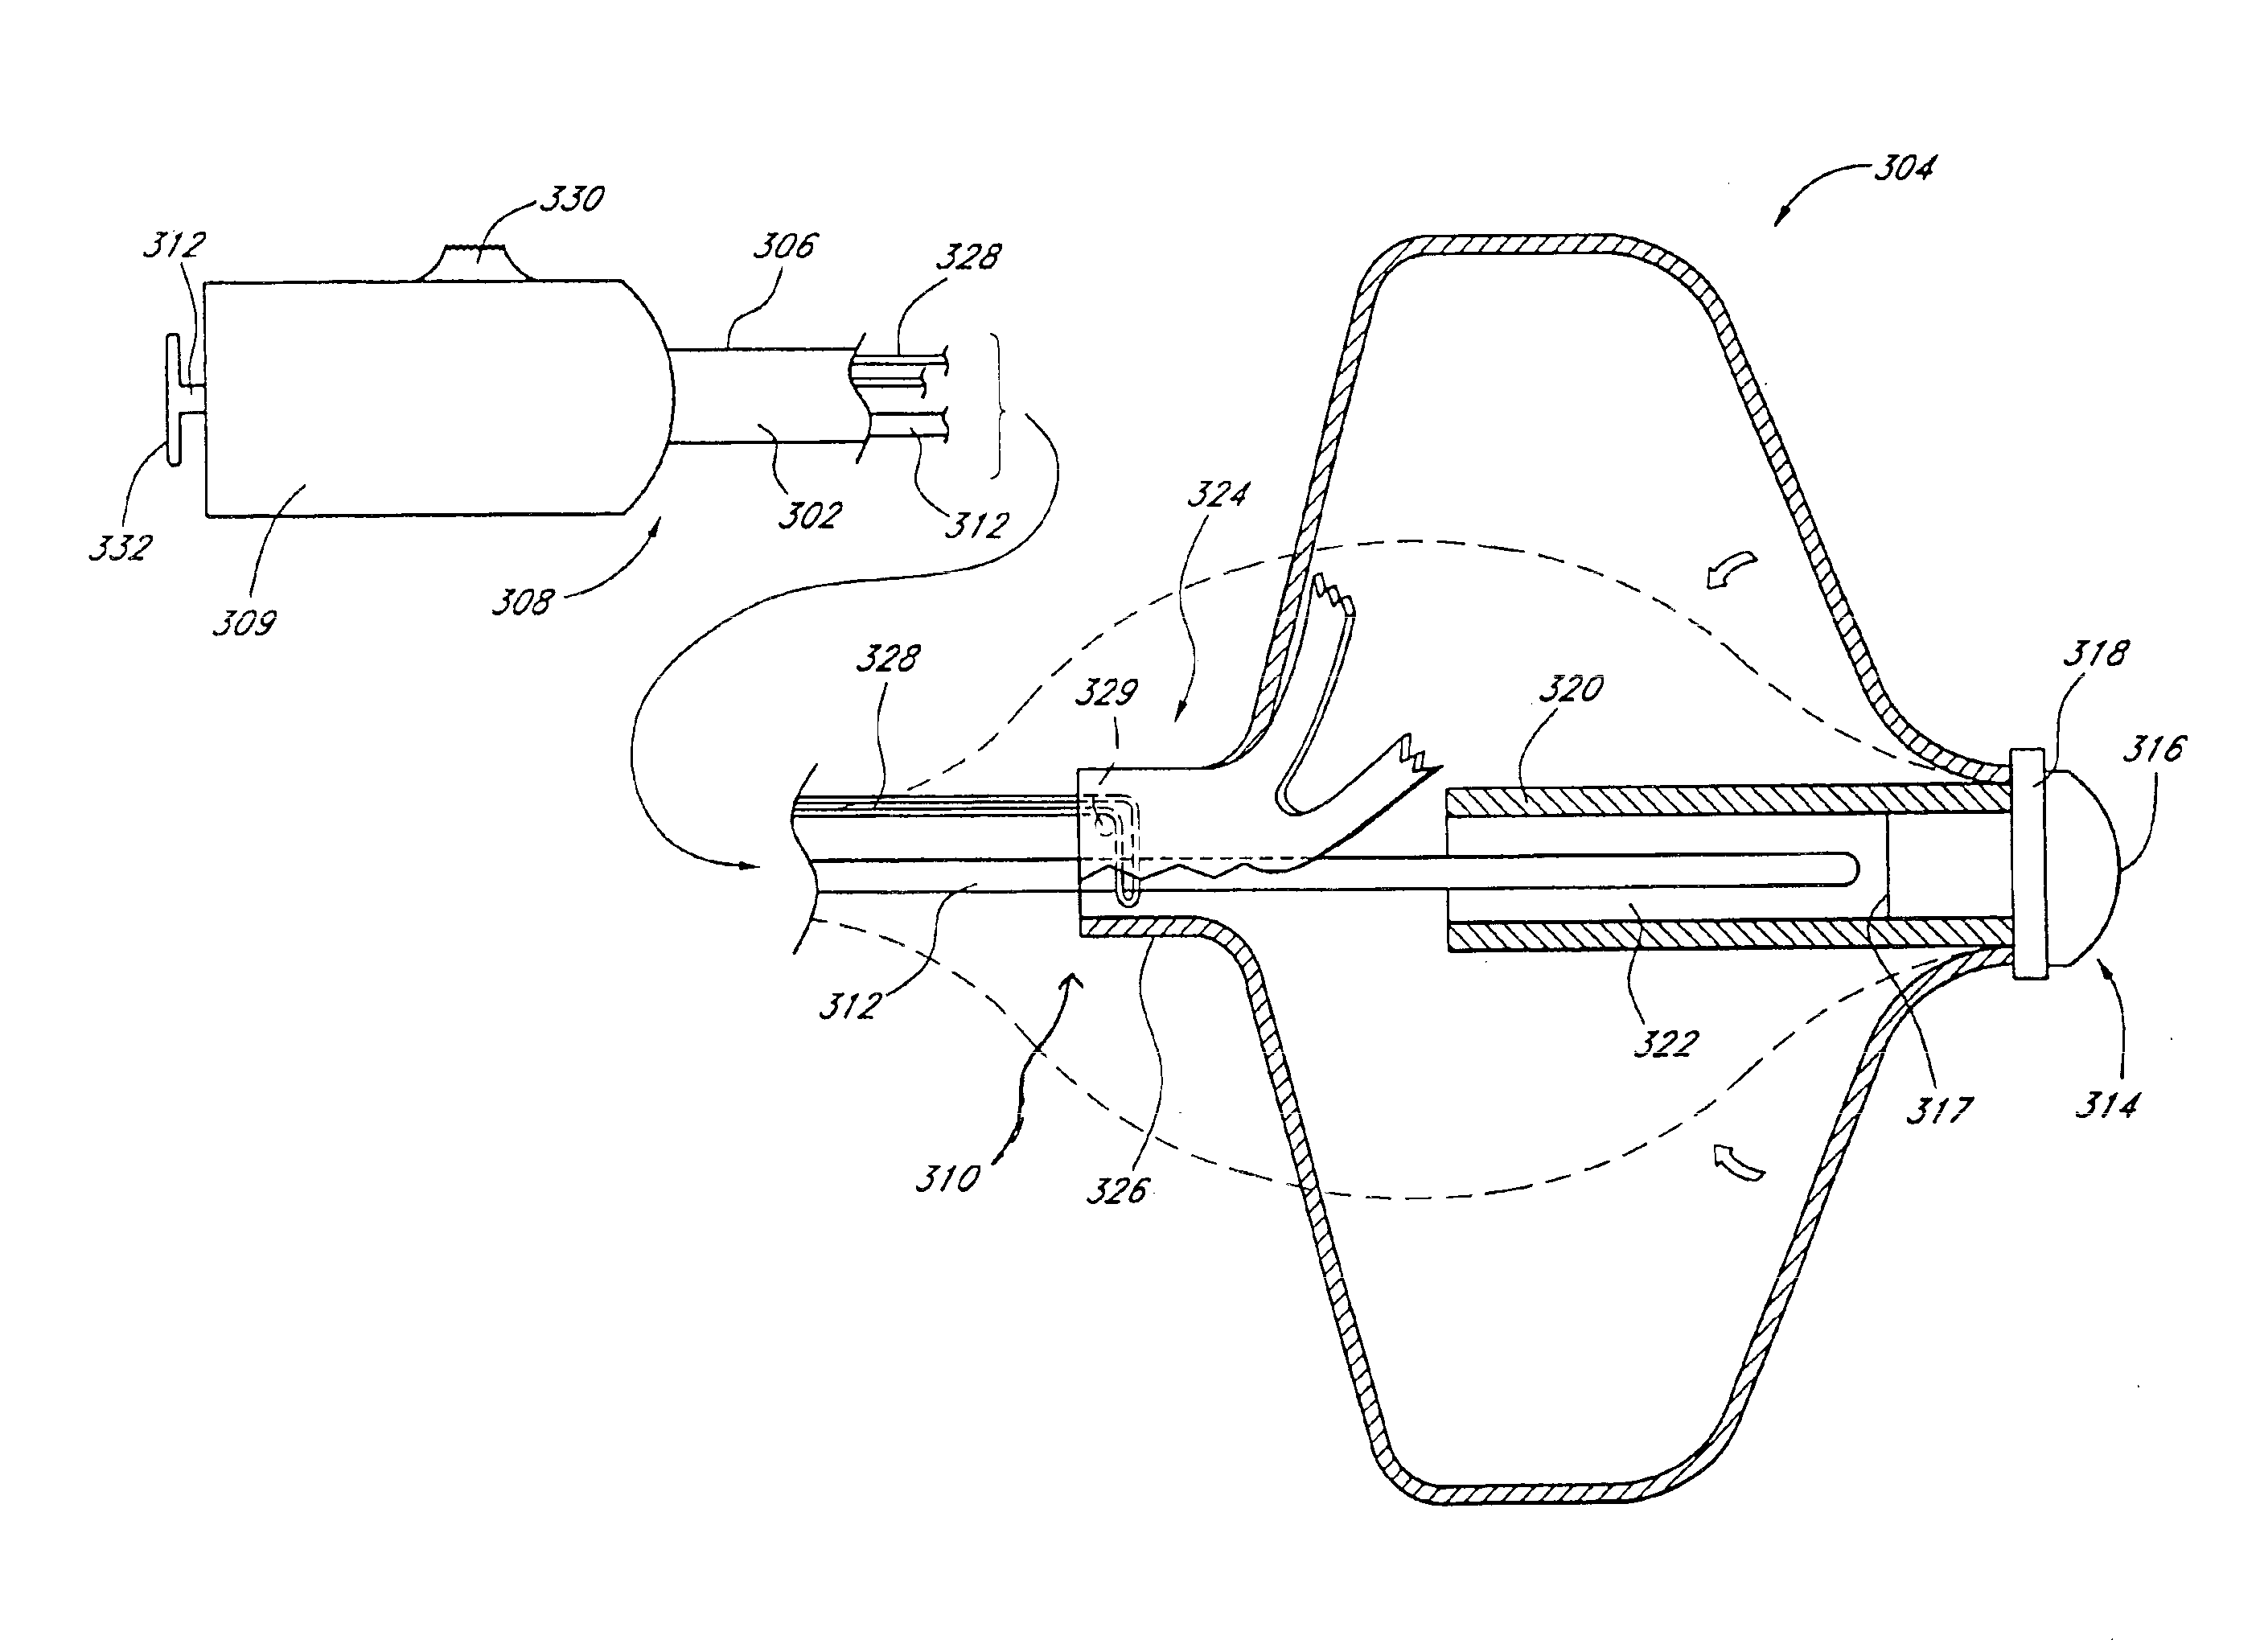 Method of implanting a device in the left atrial appendage